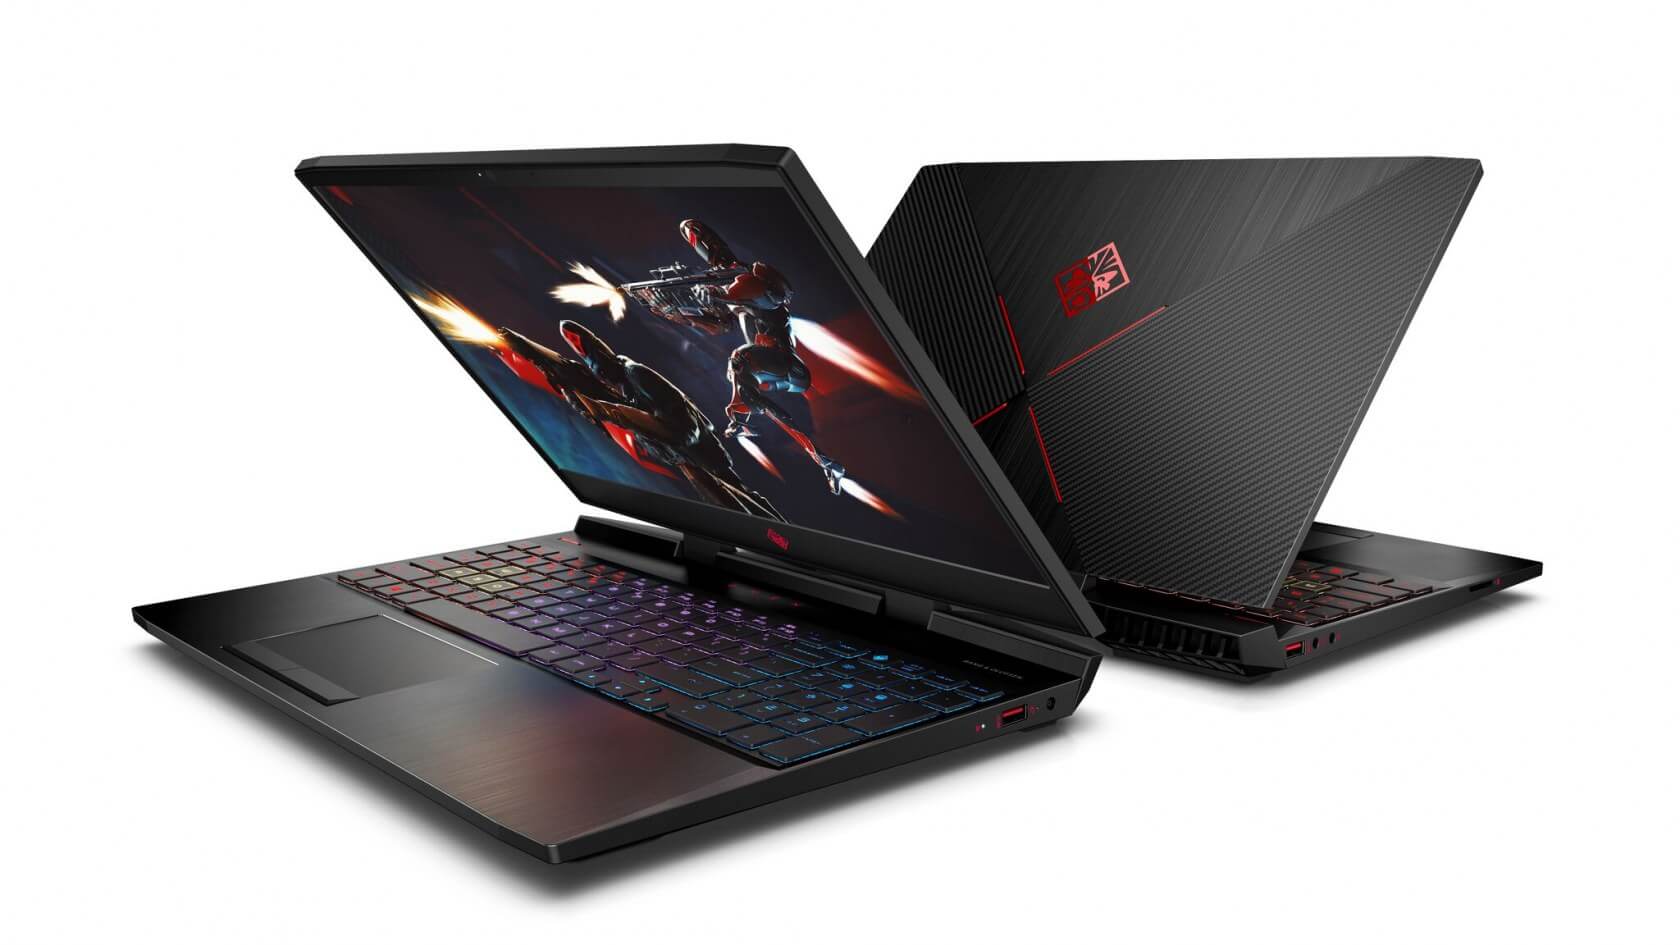 HP's Omen 15 is the first 240Hz gaming laptop